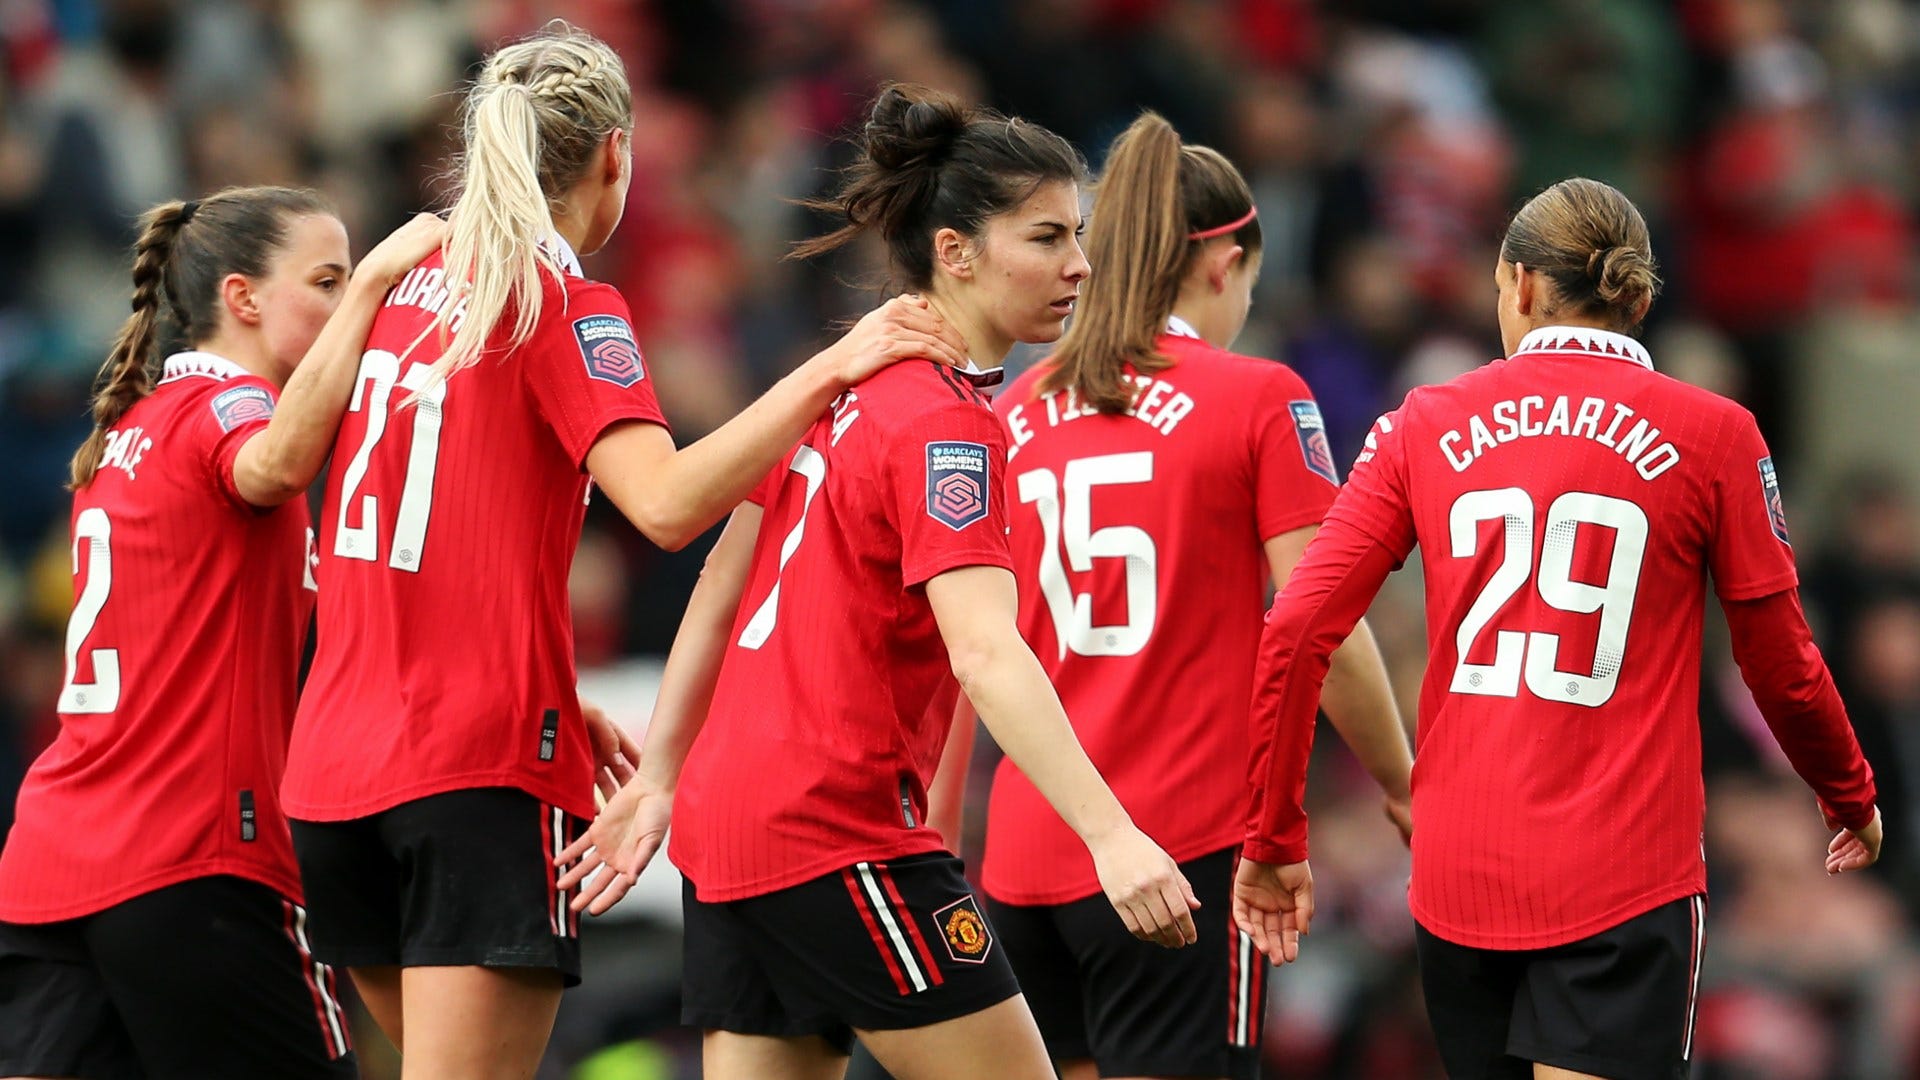 Man Utd Women vs Brighton Women Where to watch the match online, live stream, TV channels and kick-off Goal US